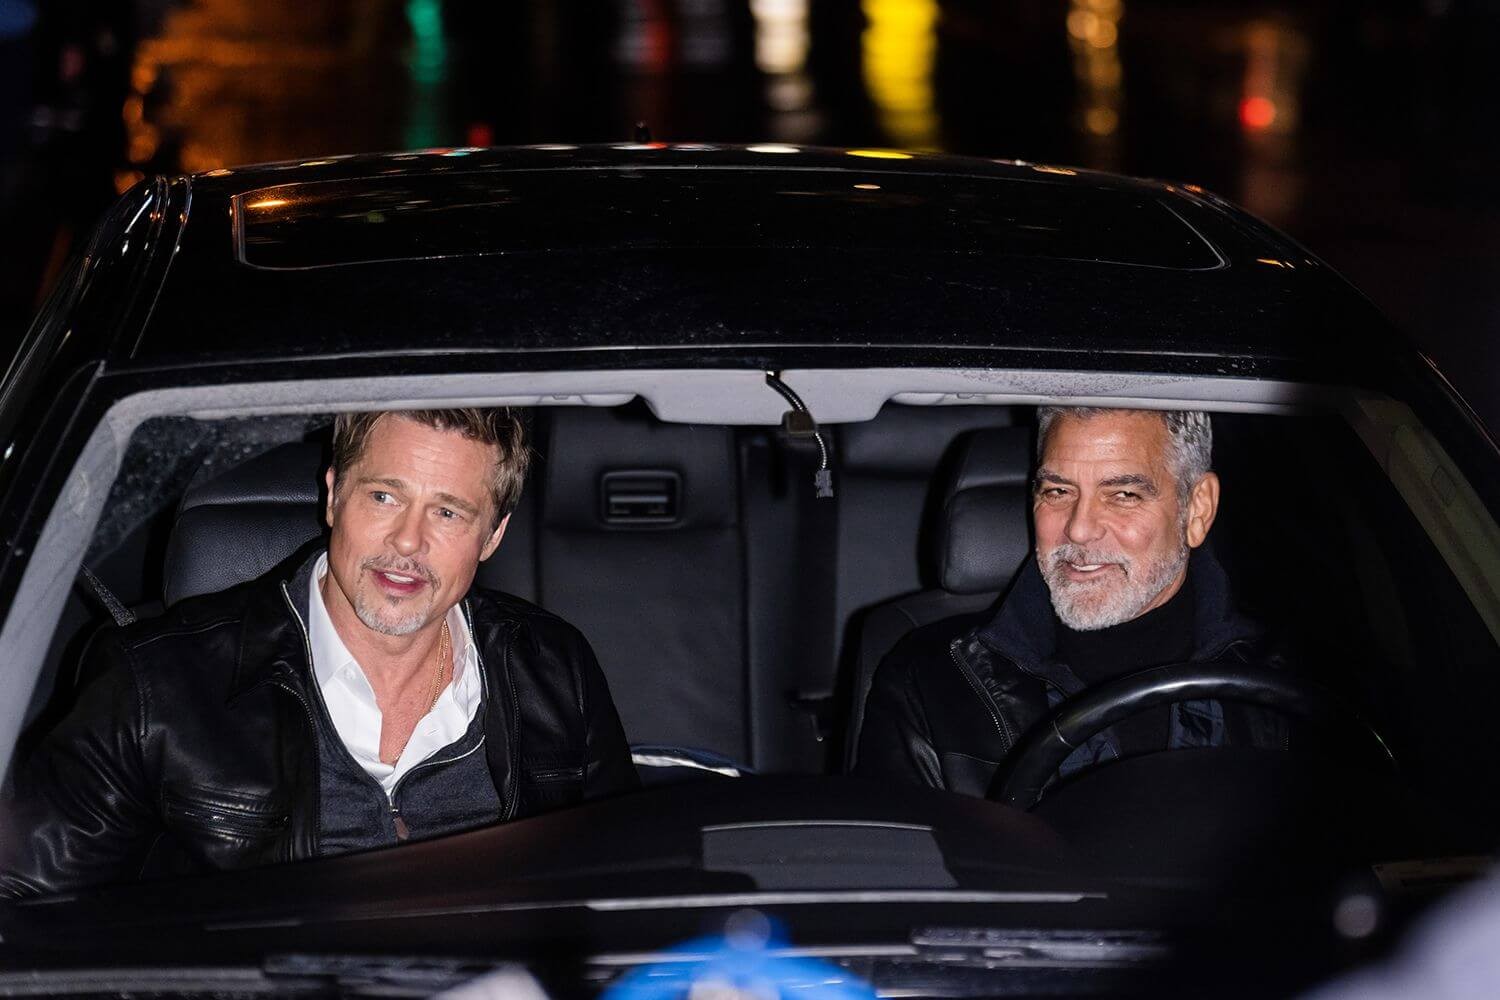 Brad Pitt and George Clooney filmed some scenes for upcoming spy thriller in NYC